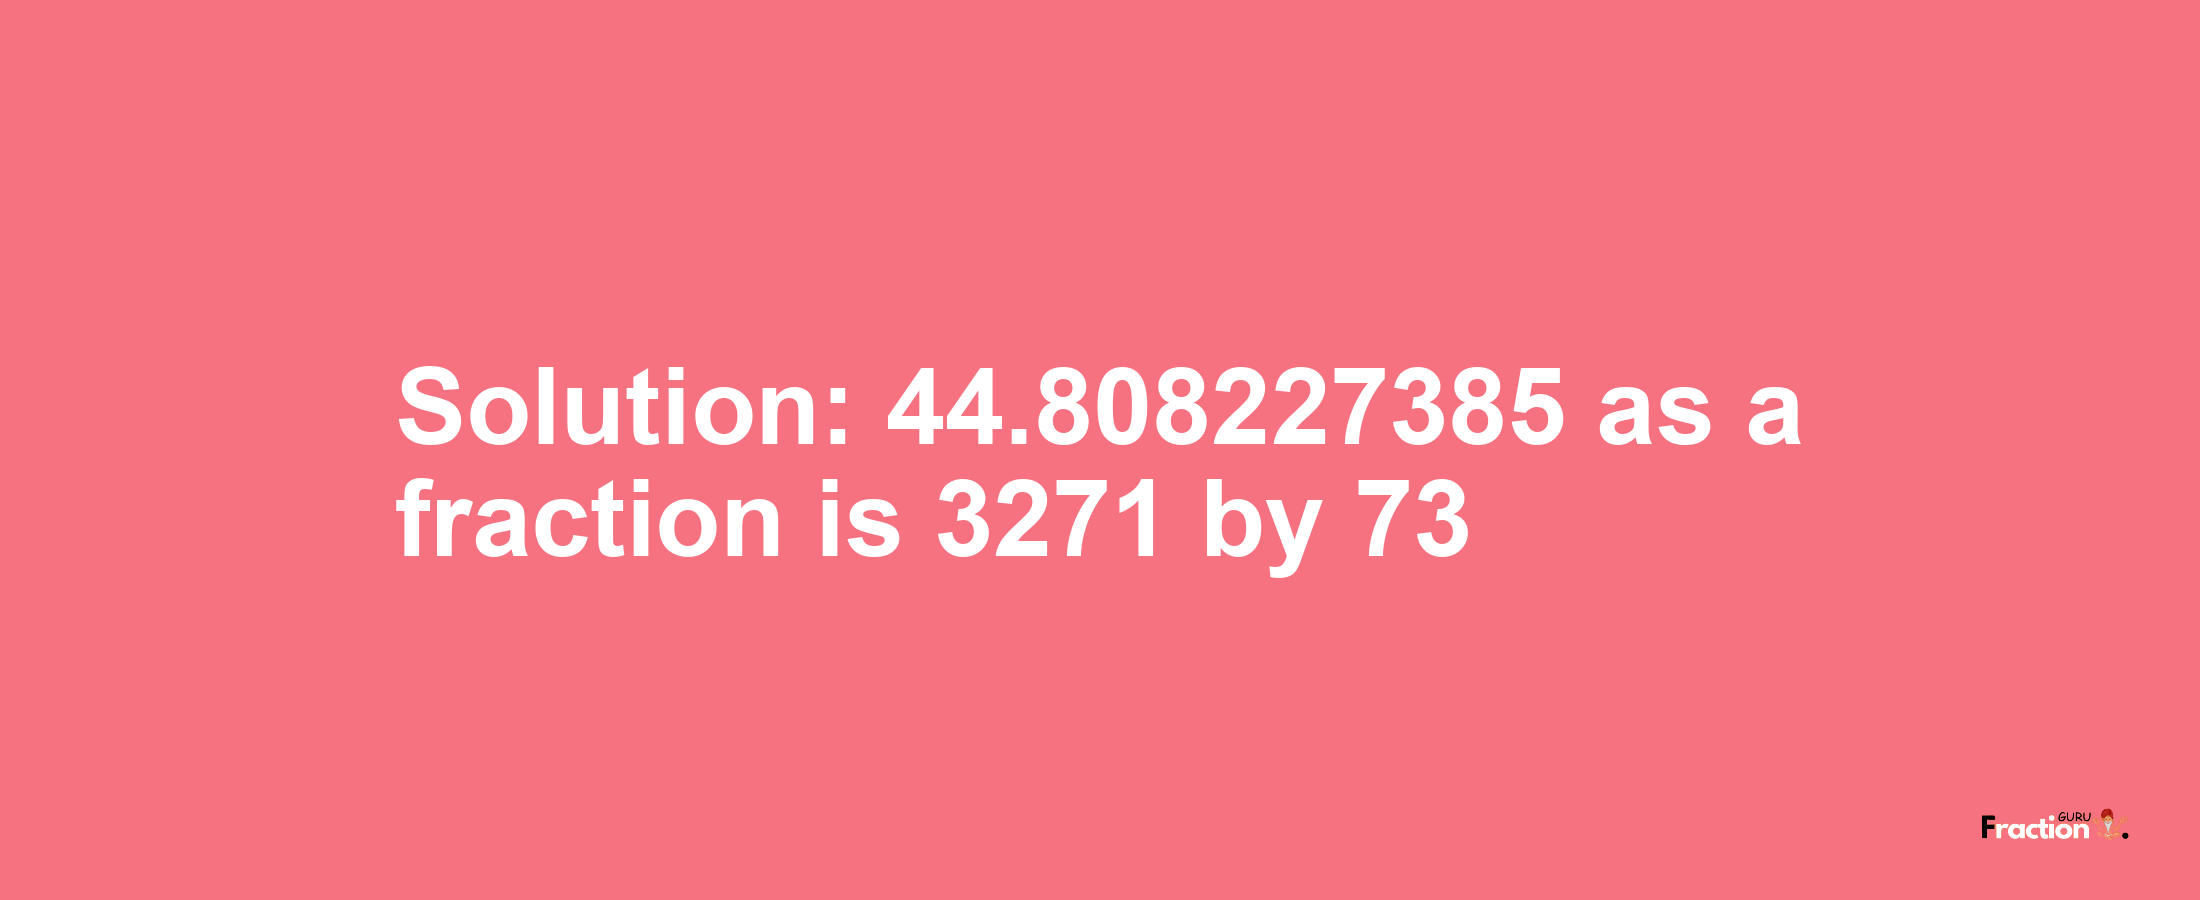 Solution:44.808227385 as a fraction is 3271/73